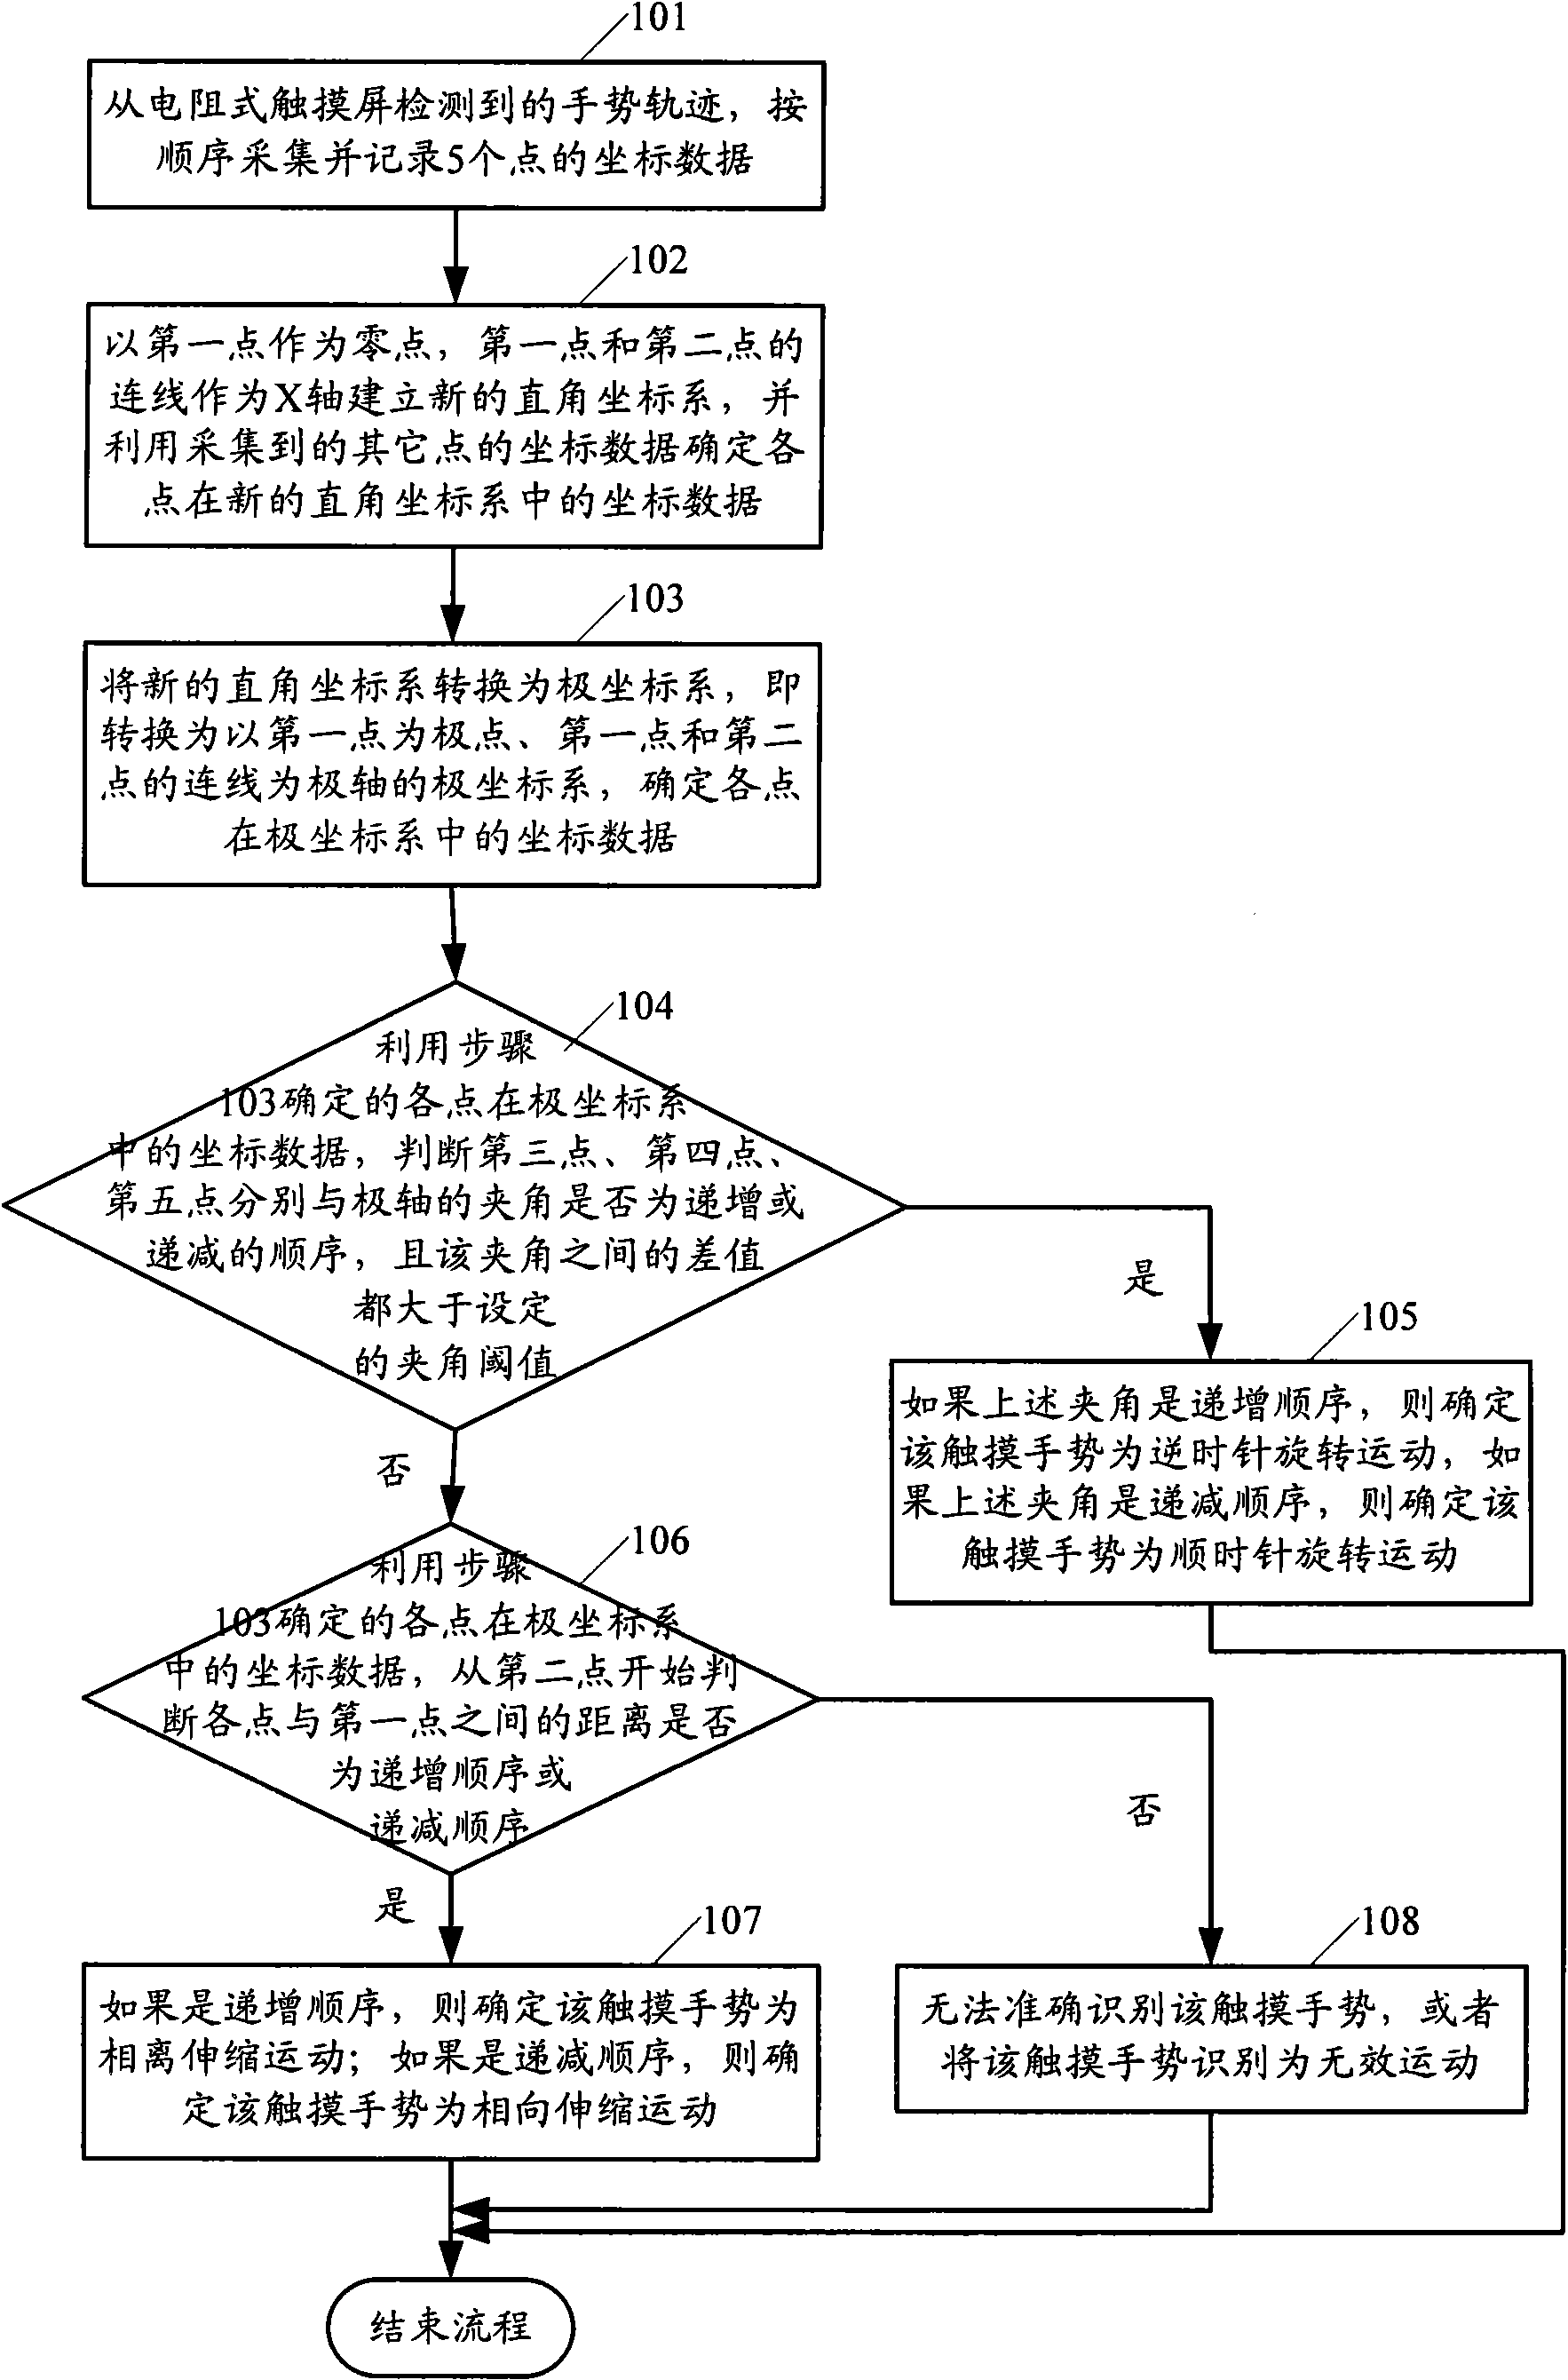 Method and device for identifying touch gestures